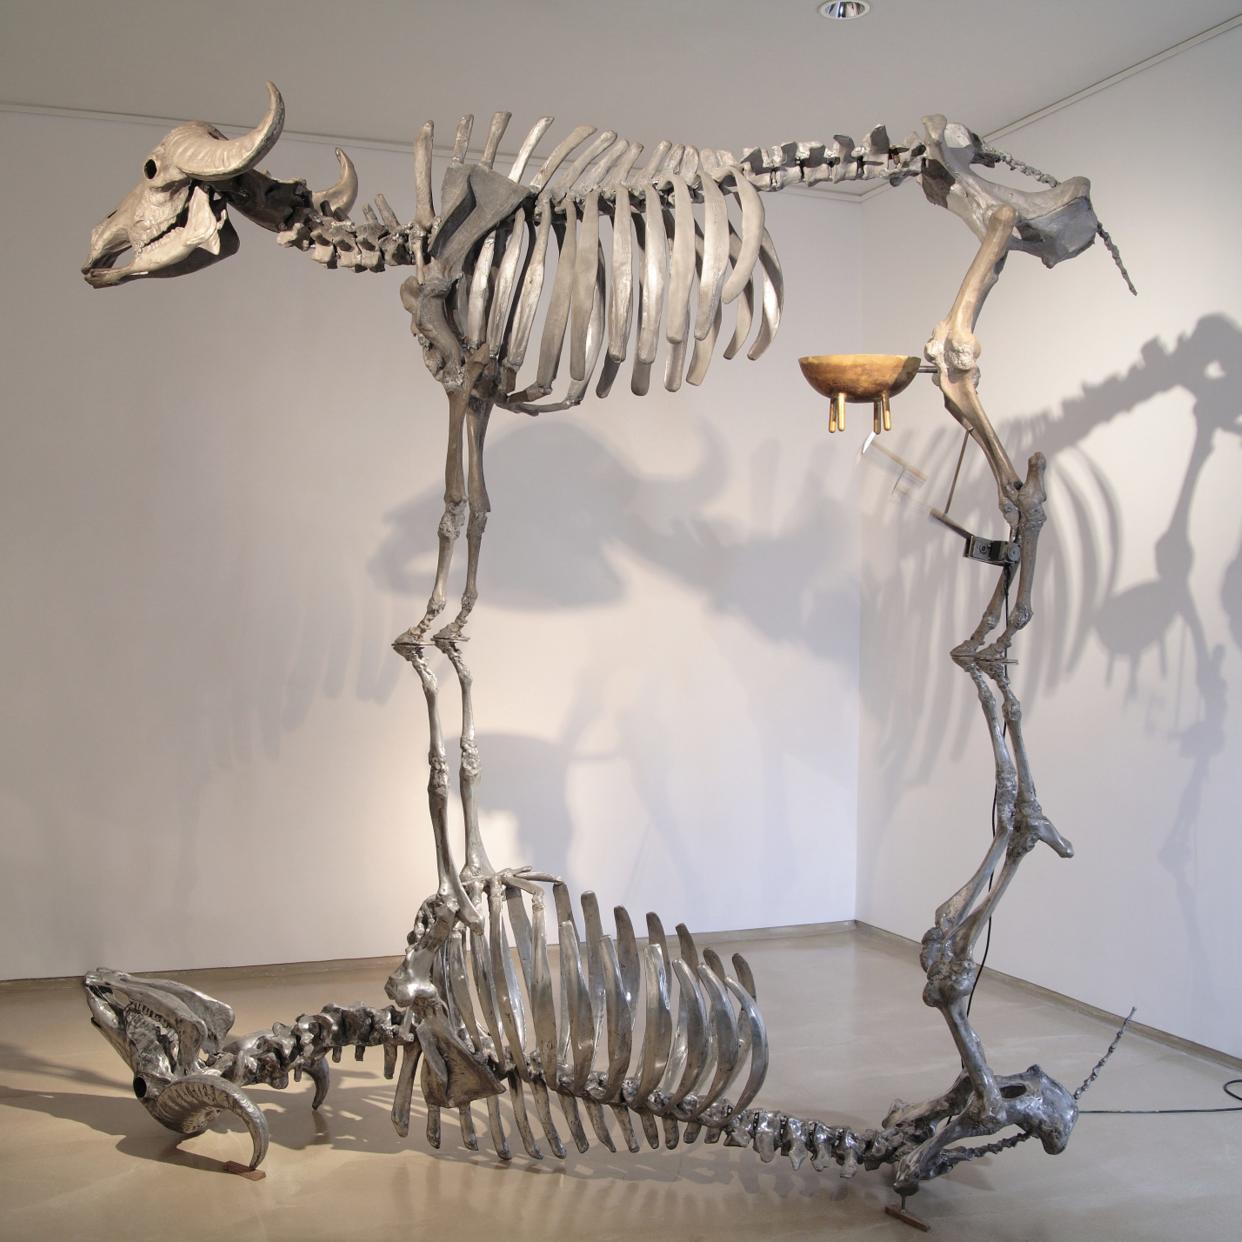 Sudarshan Shetty, Untitled (Double Cow, from the Show Love), 2006